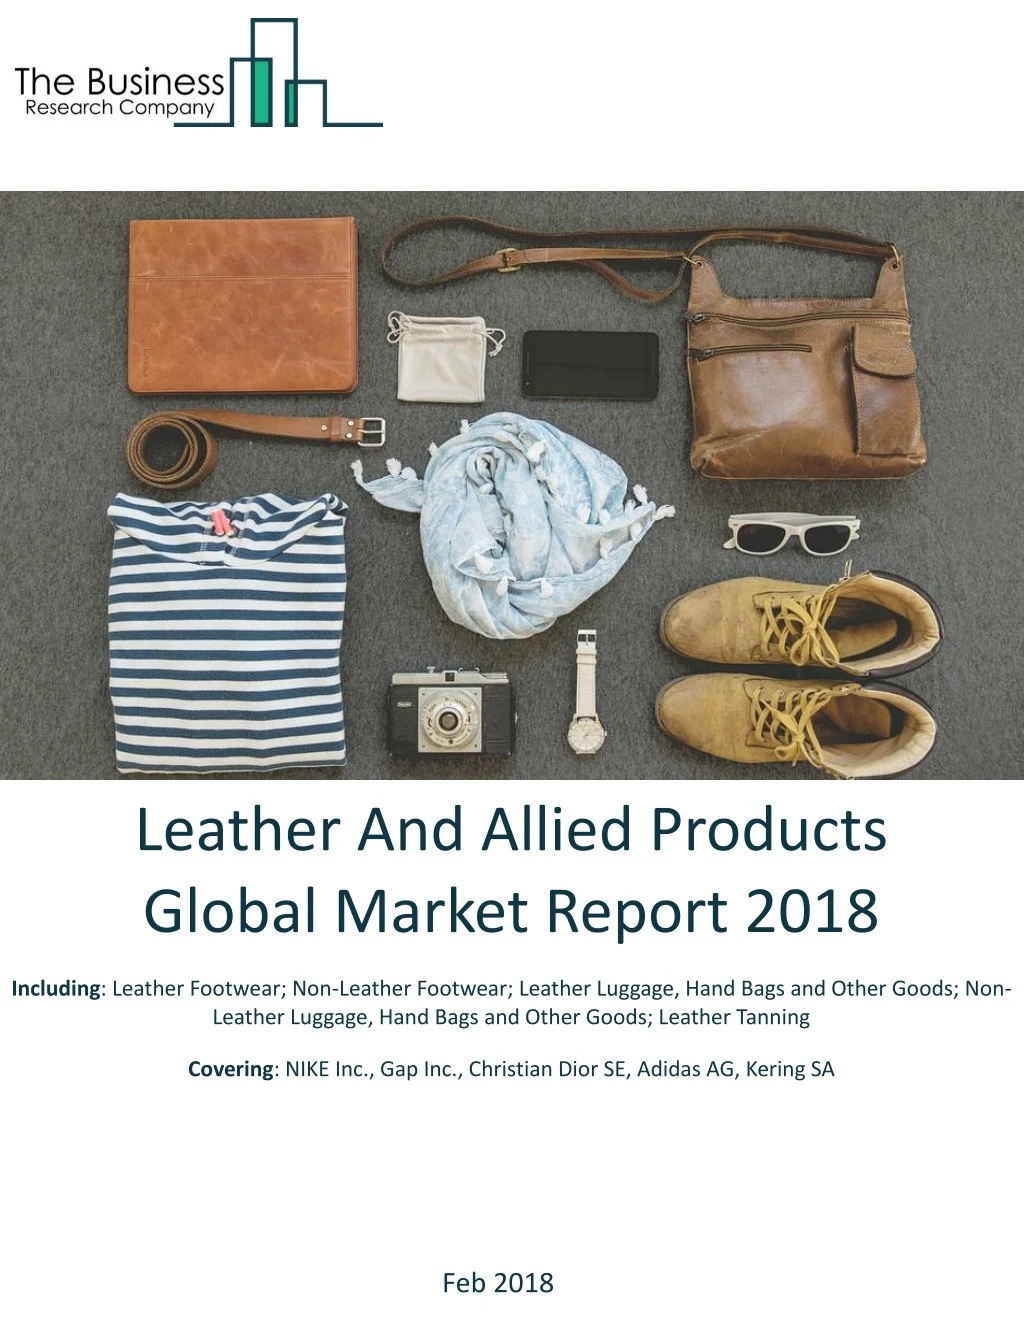 leather and allied products global market report